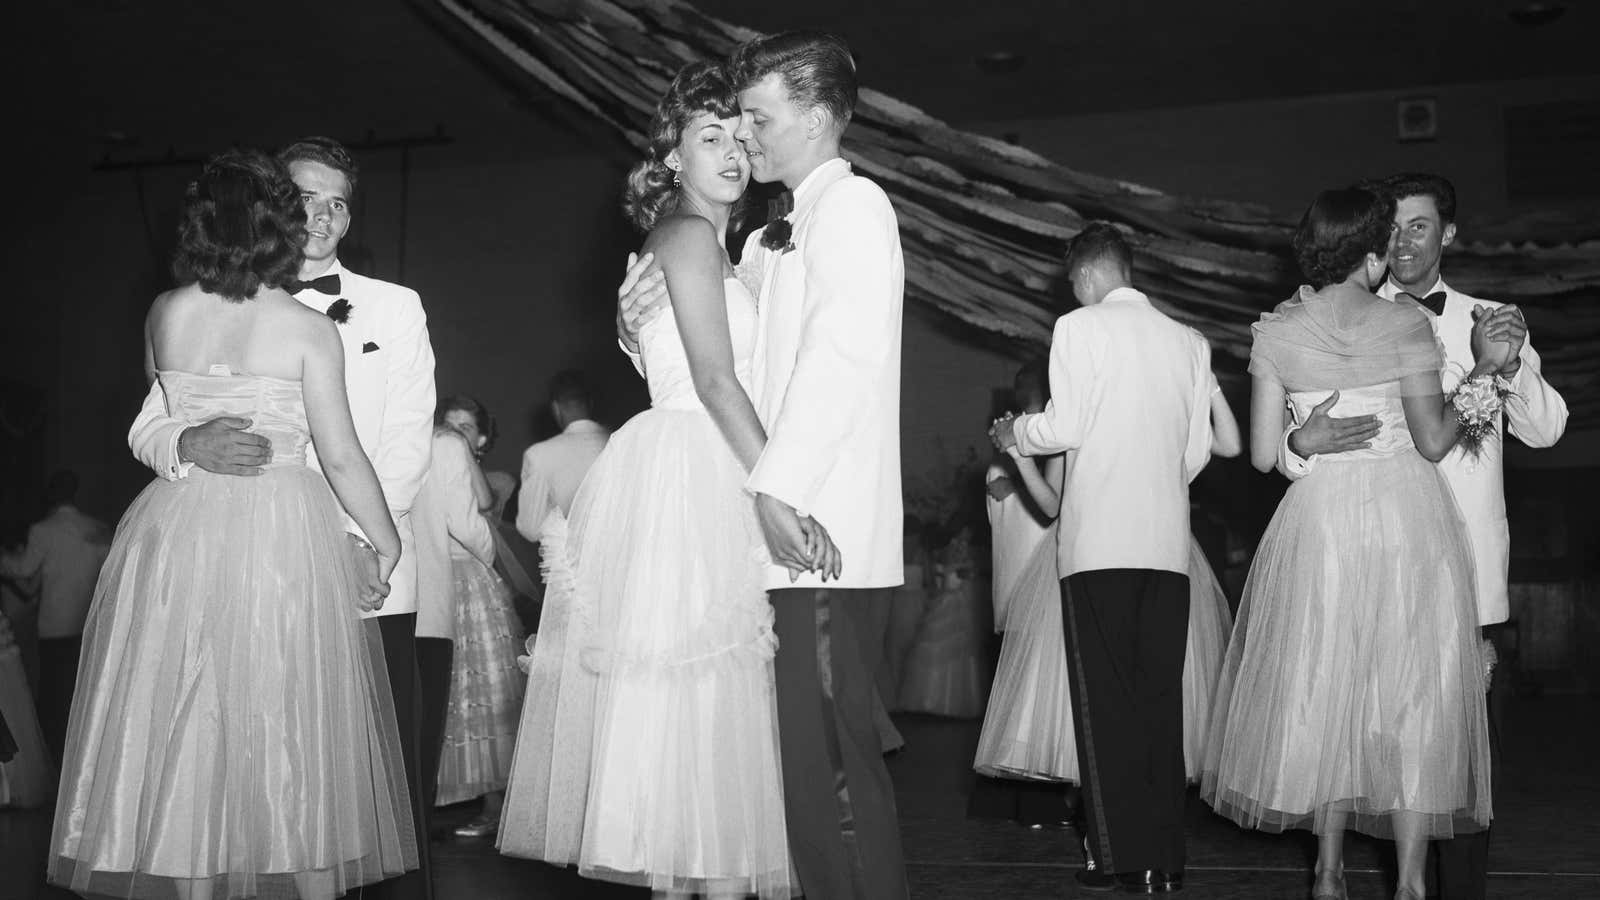 The prom dress An anthropological history of Americas sexual coming-of-age costume pic